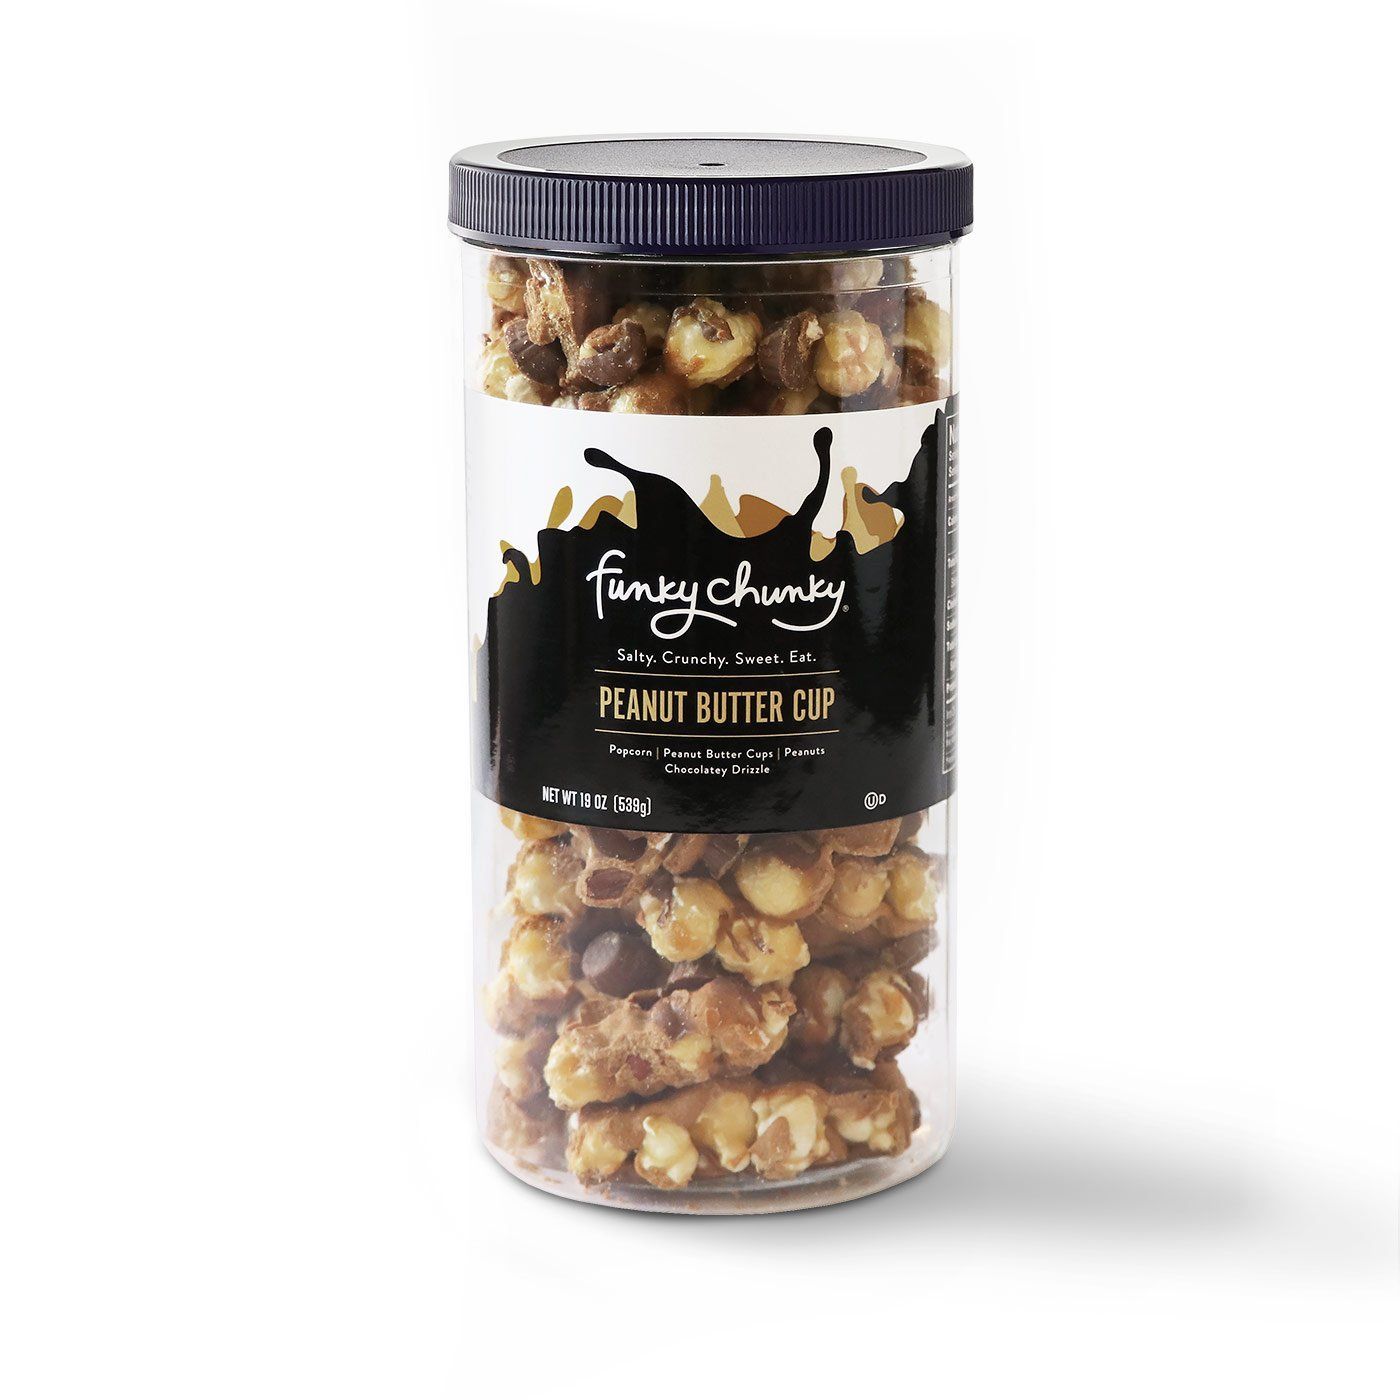 Peanut Butter Cup Tall Canister (19oz.)-td {border: 1px solid #ccc;}br {mso-data-placement:same-cell;} This gourmet popcorn confection is bursting with creamy peanut butter and milk chocolatey goodness. After drizzling our signature caramel popcorn with chocolatey goodness, we mix in whole crunchy peanuts and delicious mini peanut butter cups for over-the-top flavor explosion!-Funky Chunky